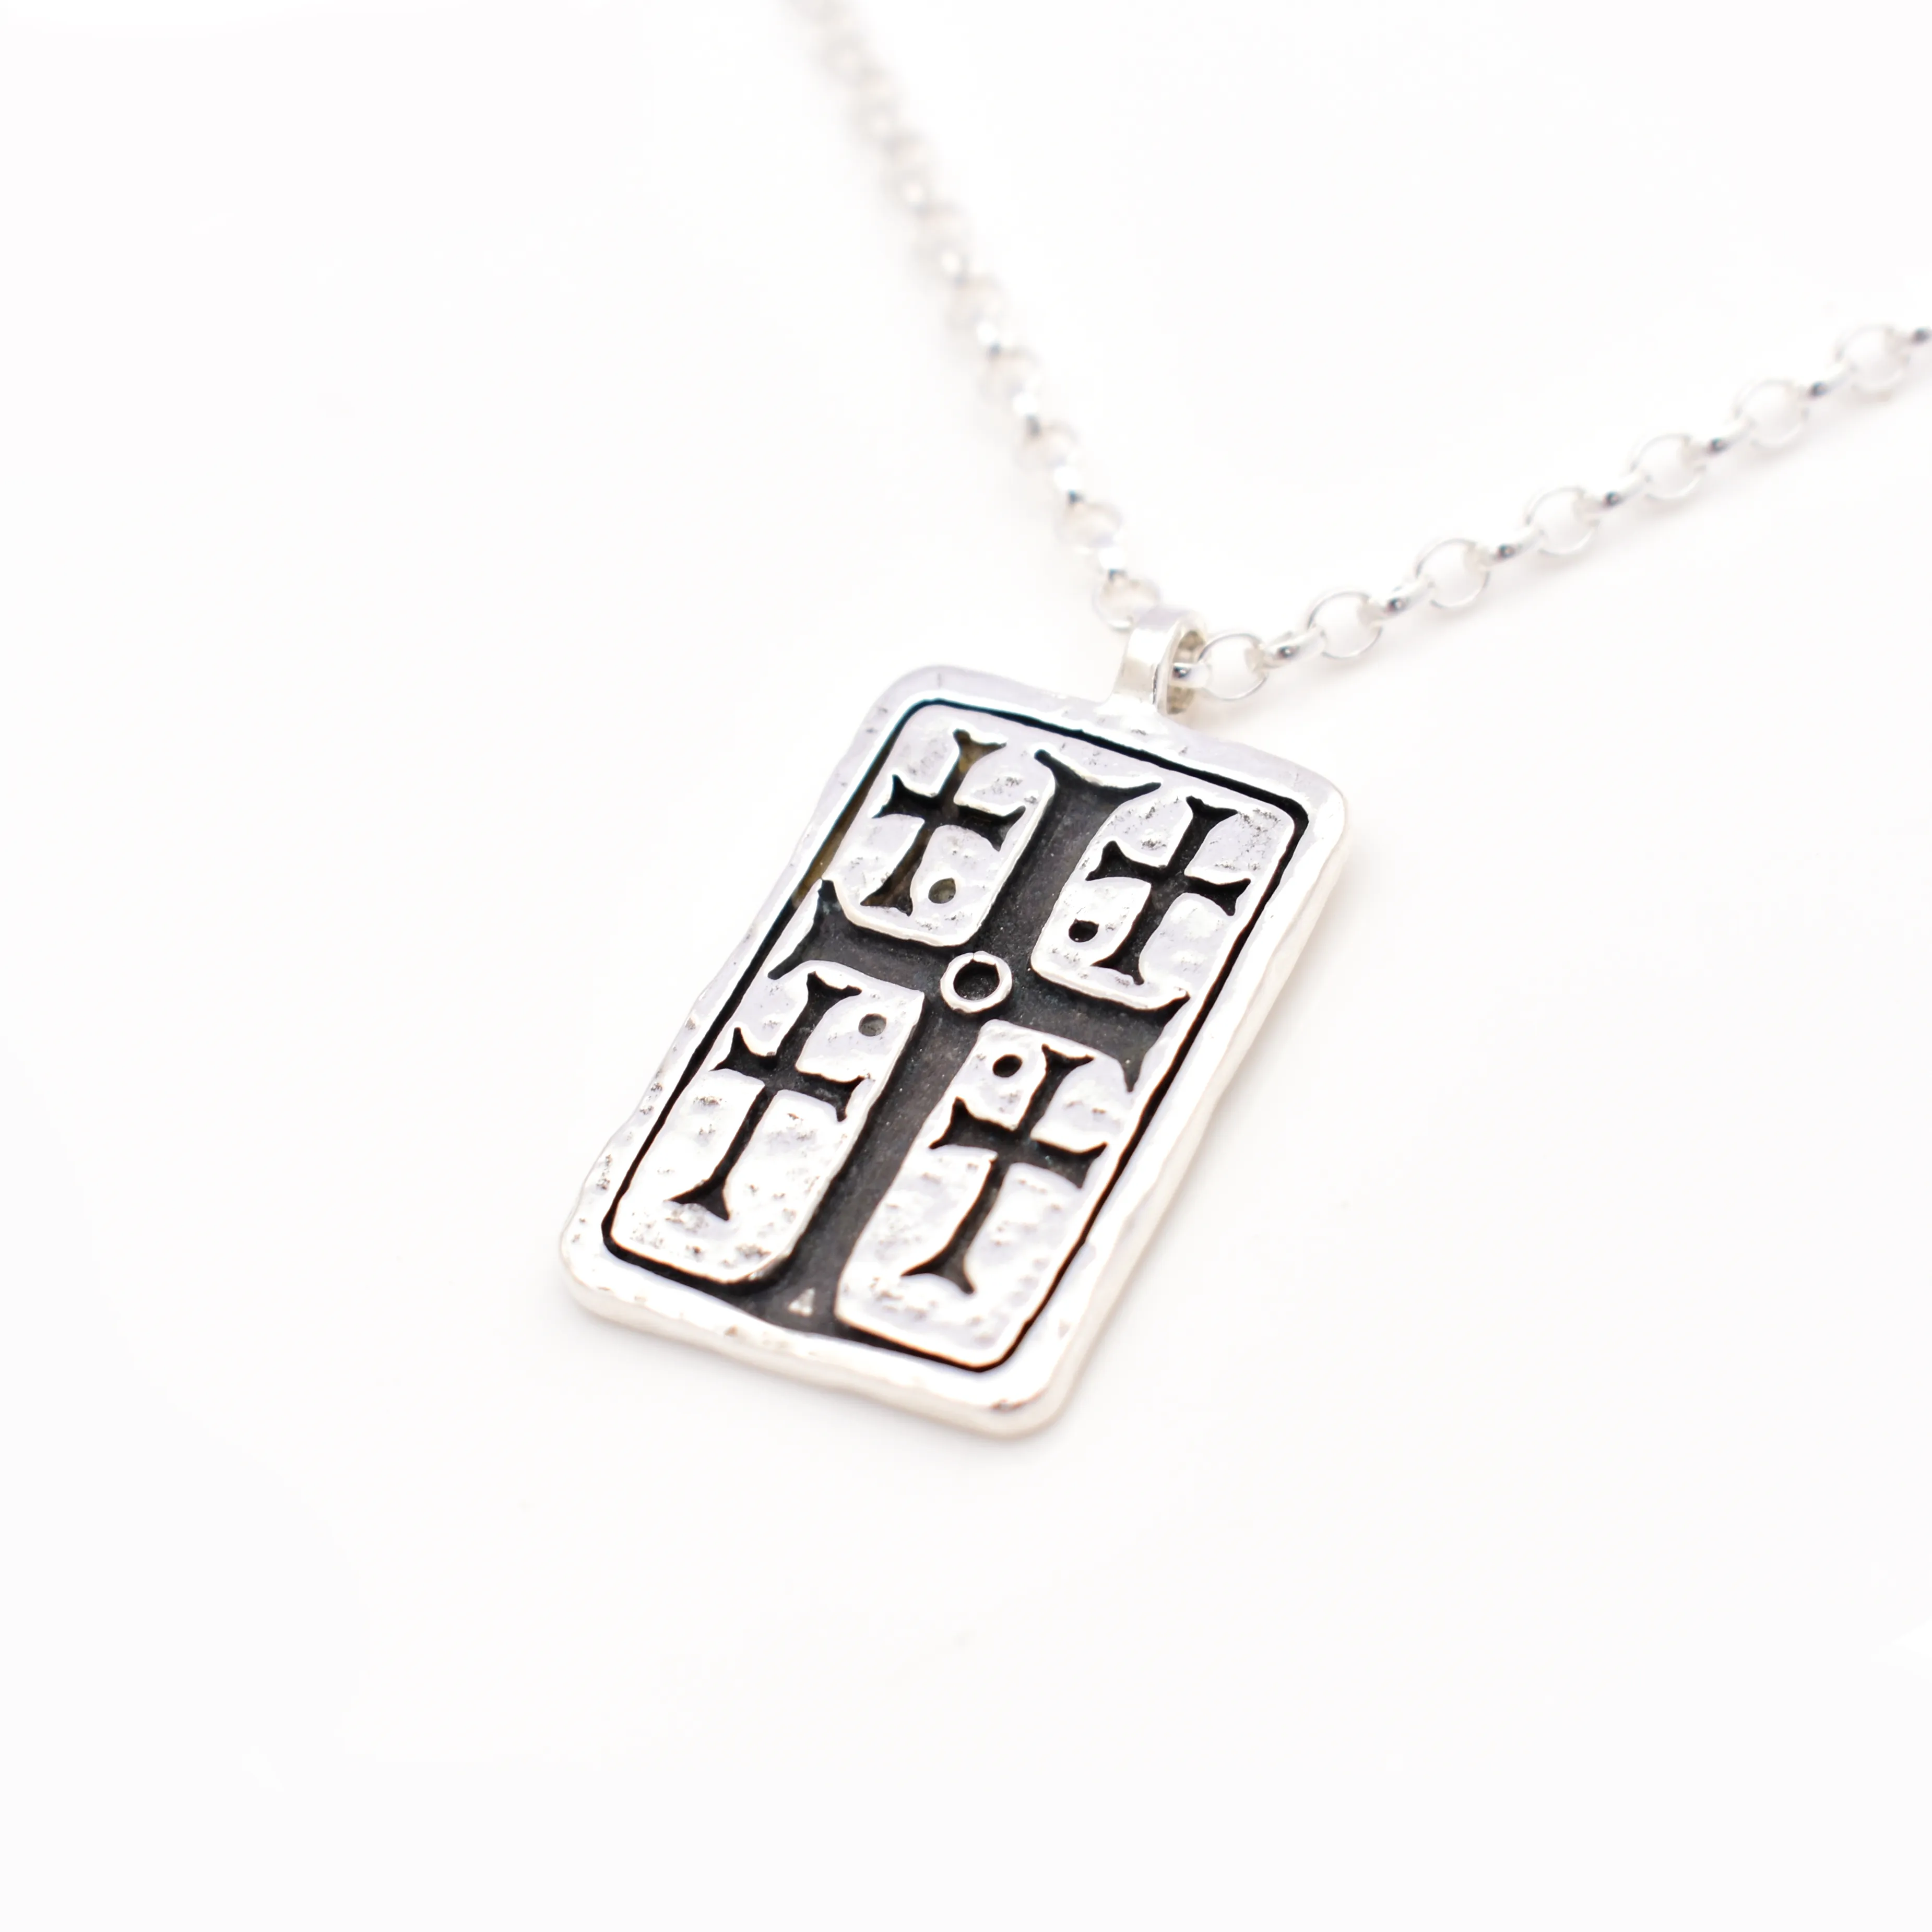 Inismurray | Sterling Silver Square Cross Pendant | Large | The Cat & The Moon